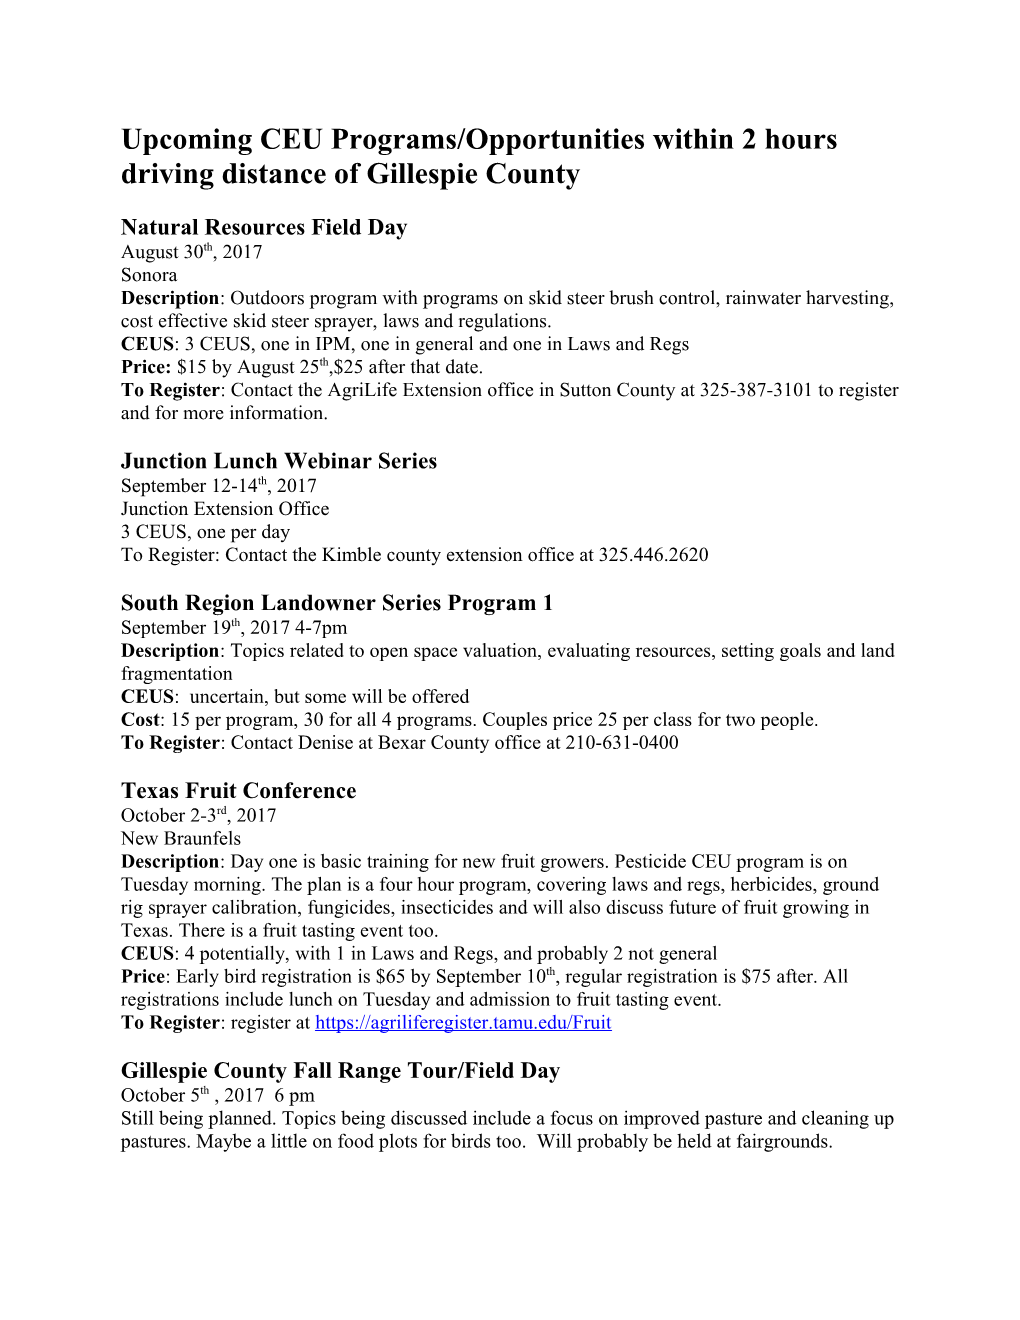 Upcoming CEU Programs/Opportunities Within 2 Hours Driving Distance of Gillespie County